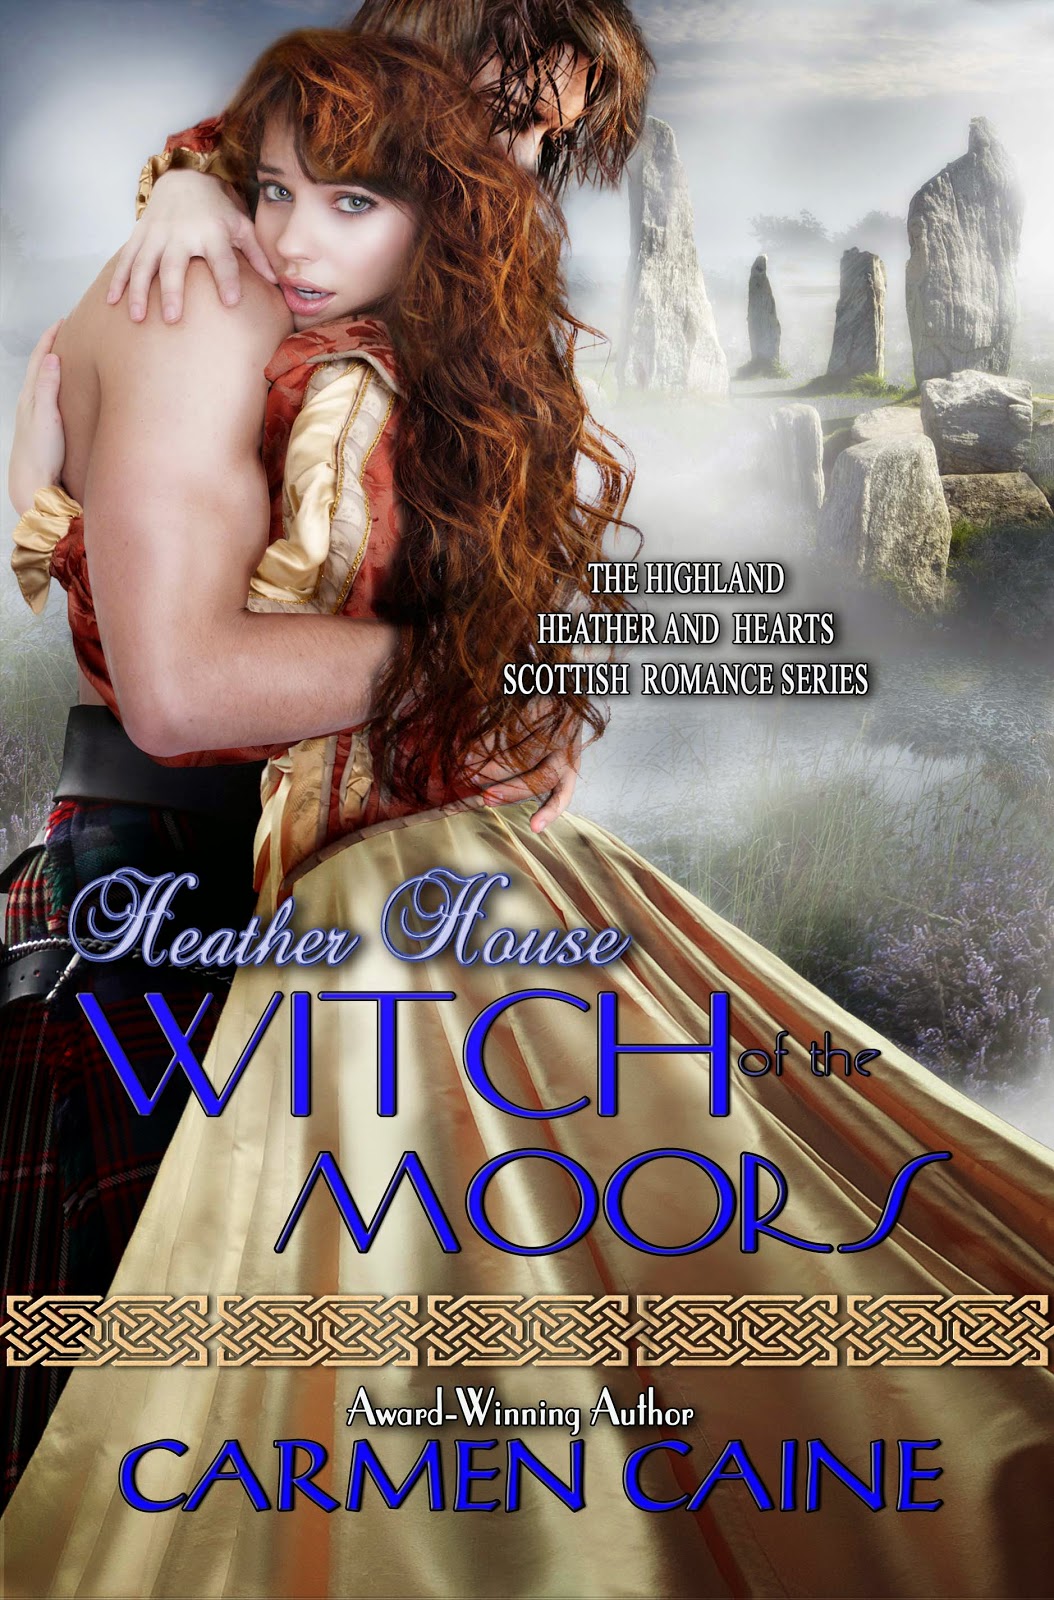 HISTORICAL ROMANCE REVIEW with Regan Walker: Favorite Author of ...